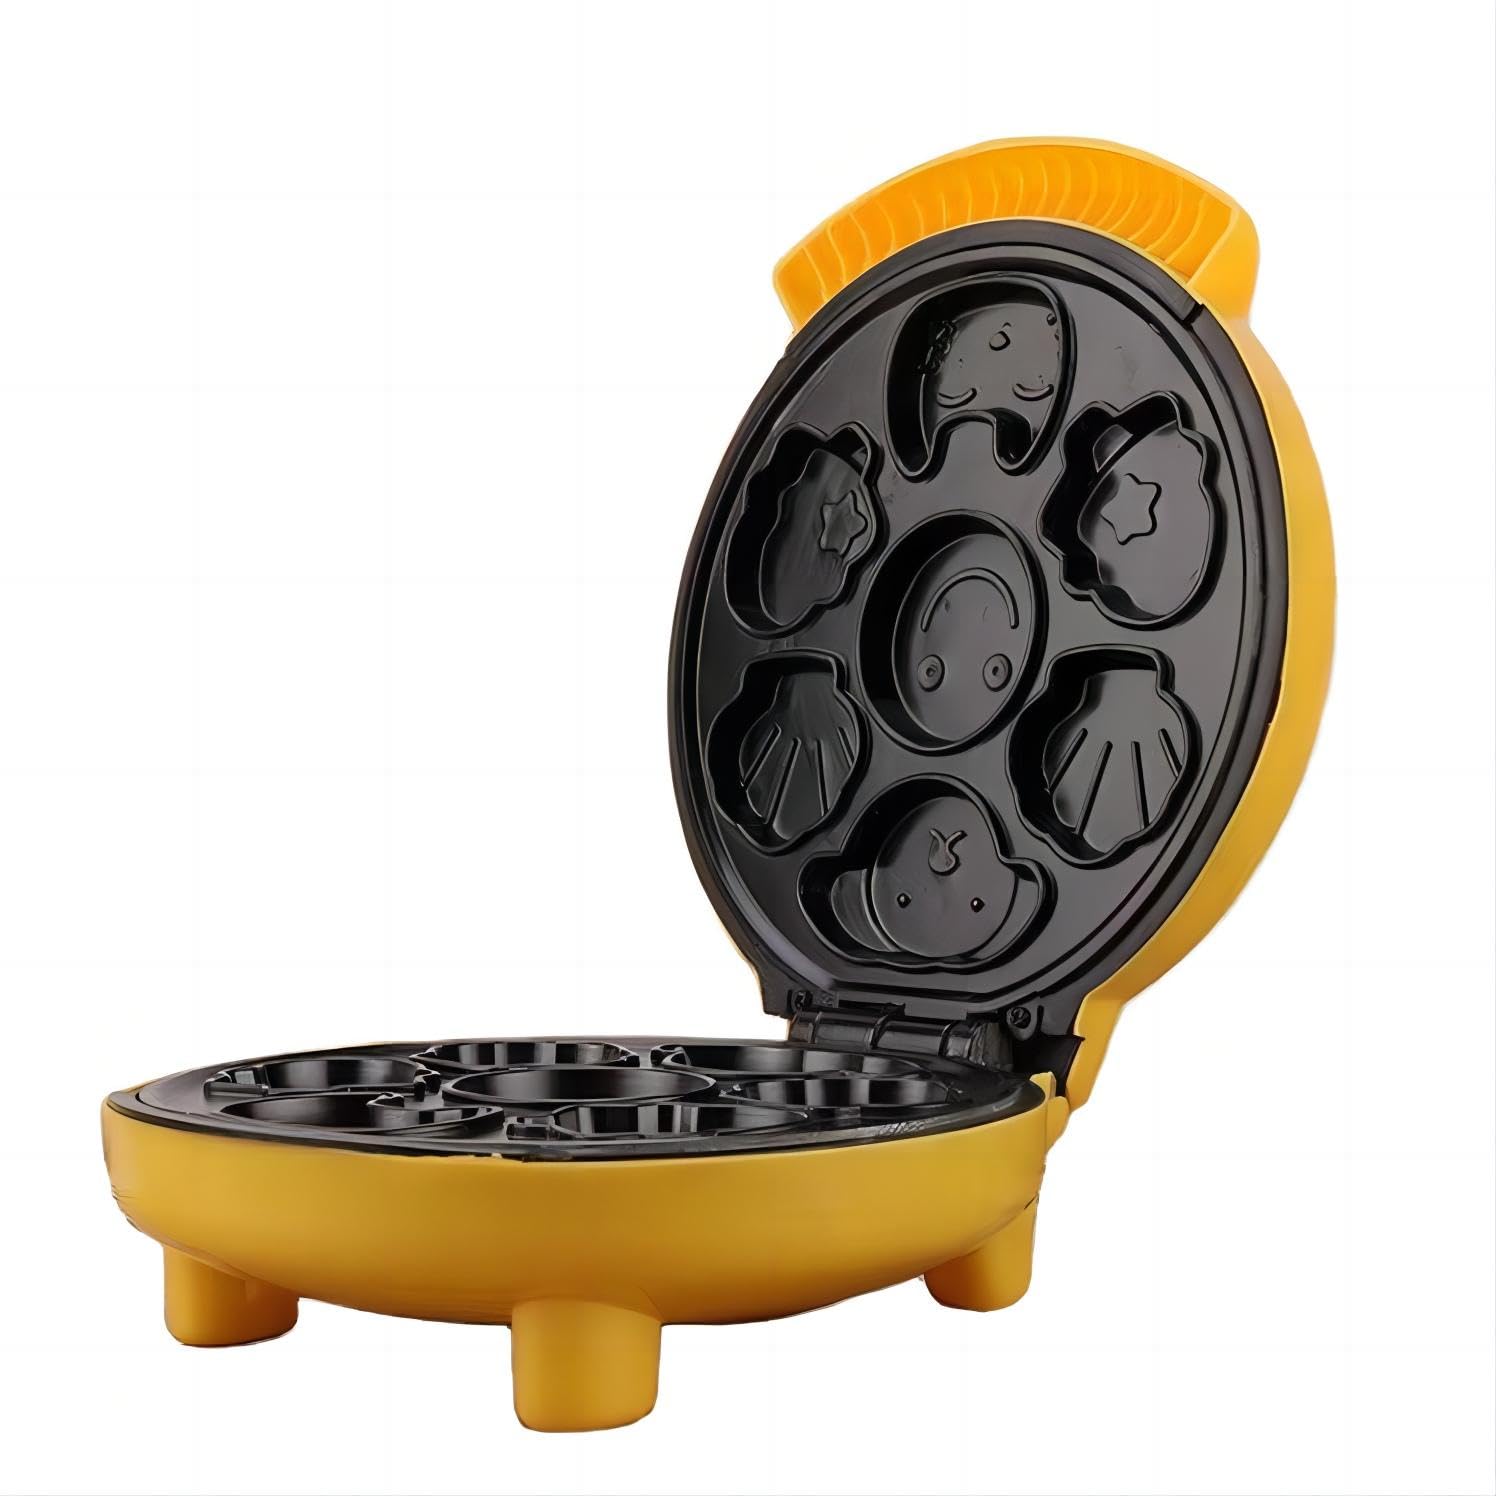 Waffle Maker for Kids 7 Different Shaped Pancakes Animal Waffle Maker Electric Nonstick Waffler Iron, Pan Cake Cooker